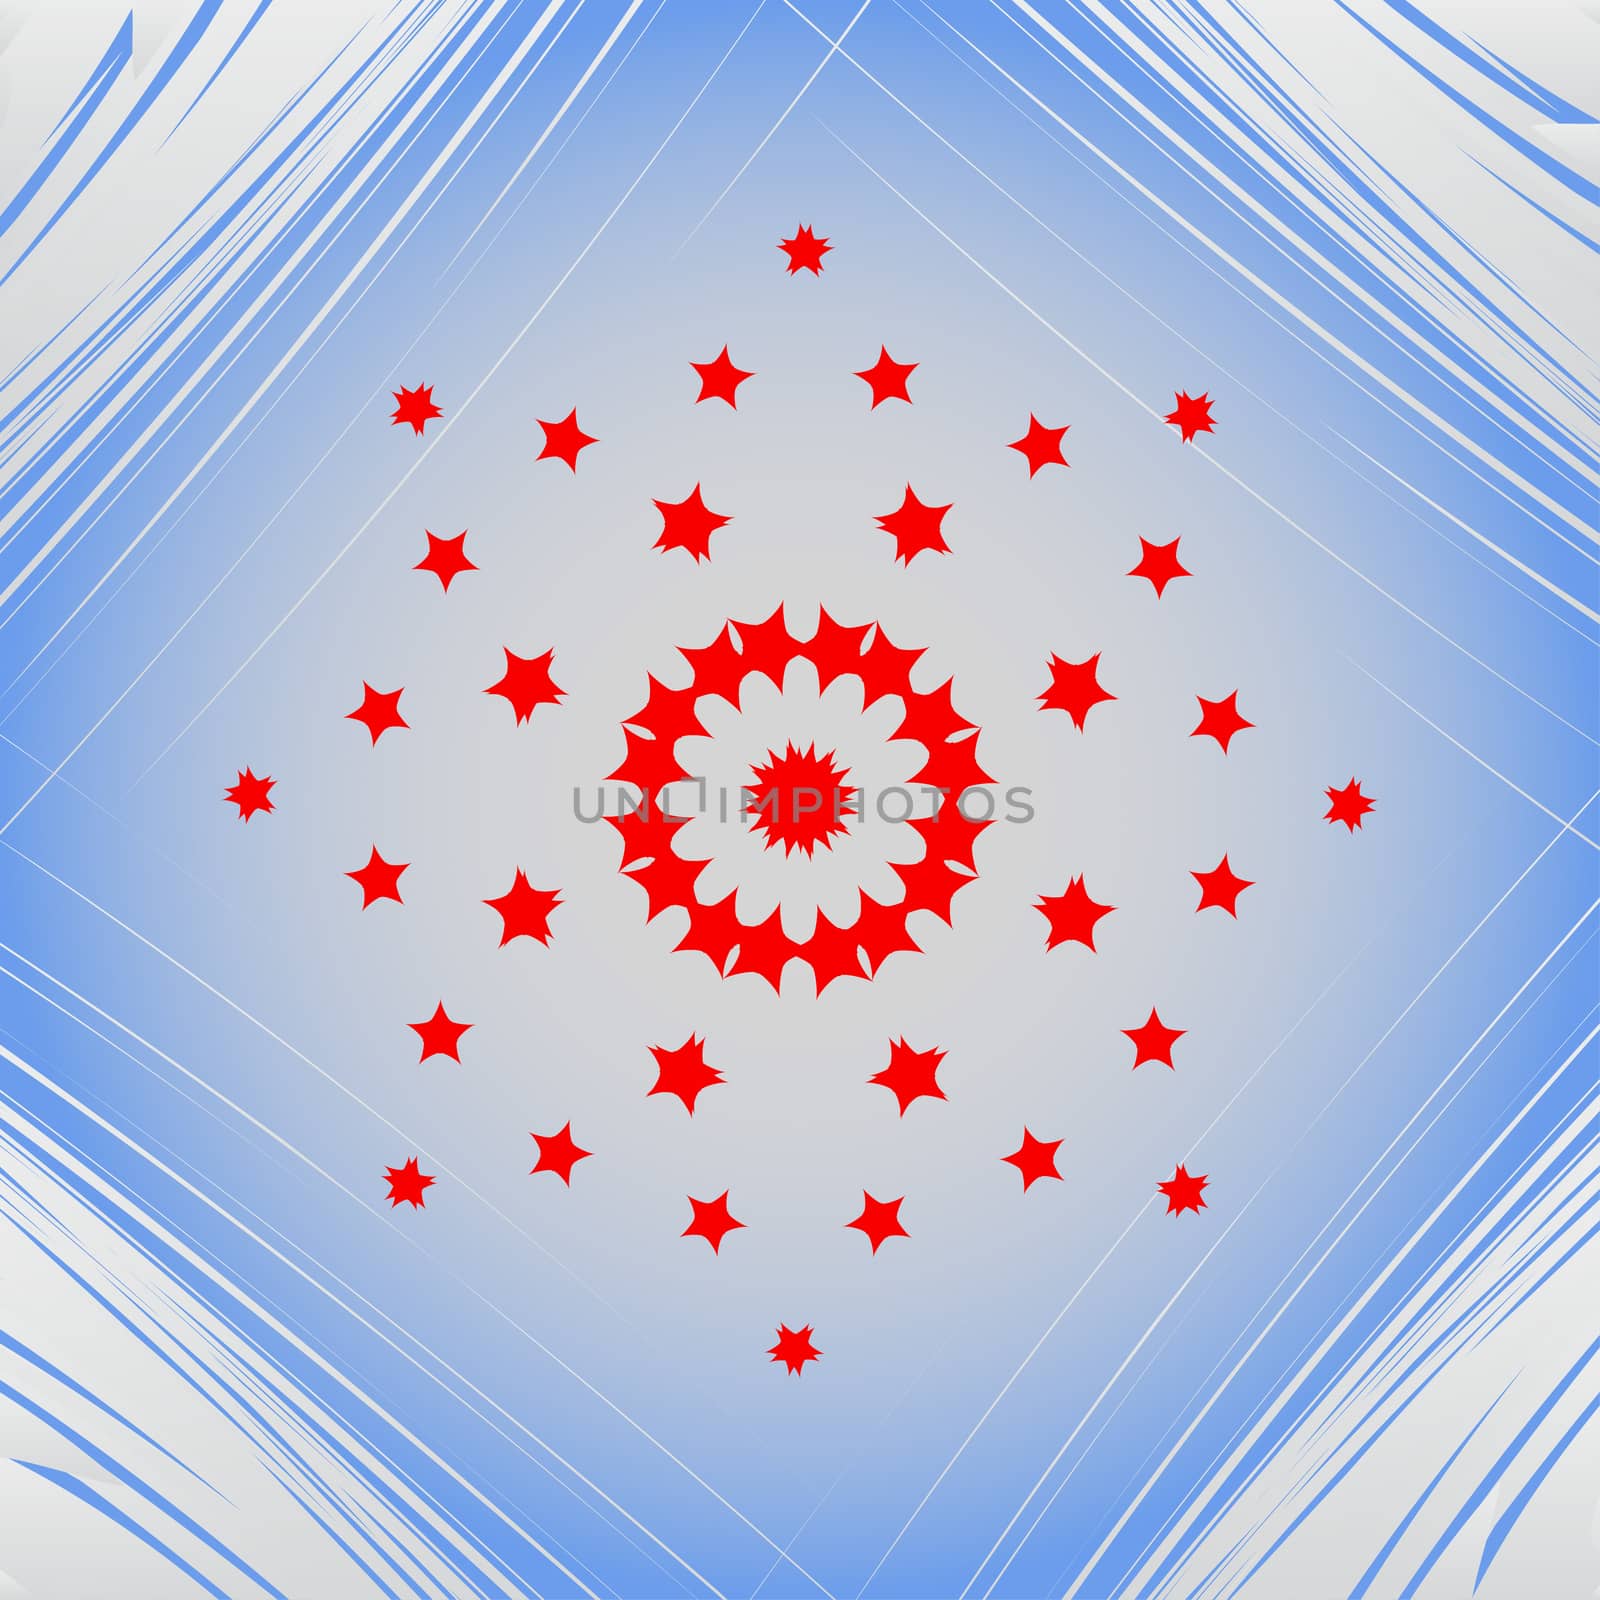 star web icon on a flat geometric abstract background .  illustration. 